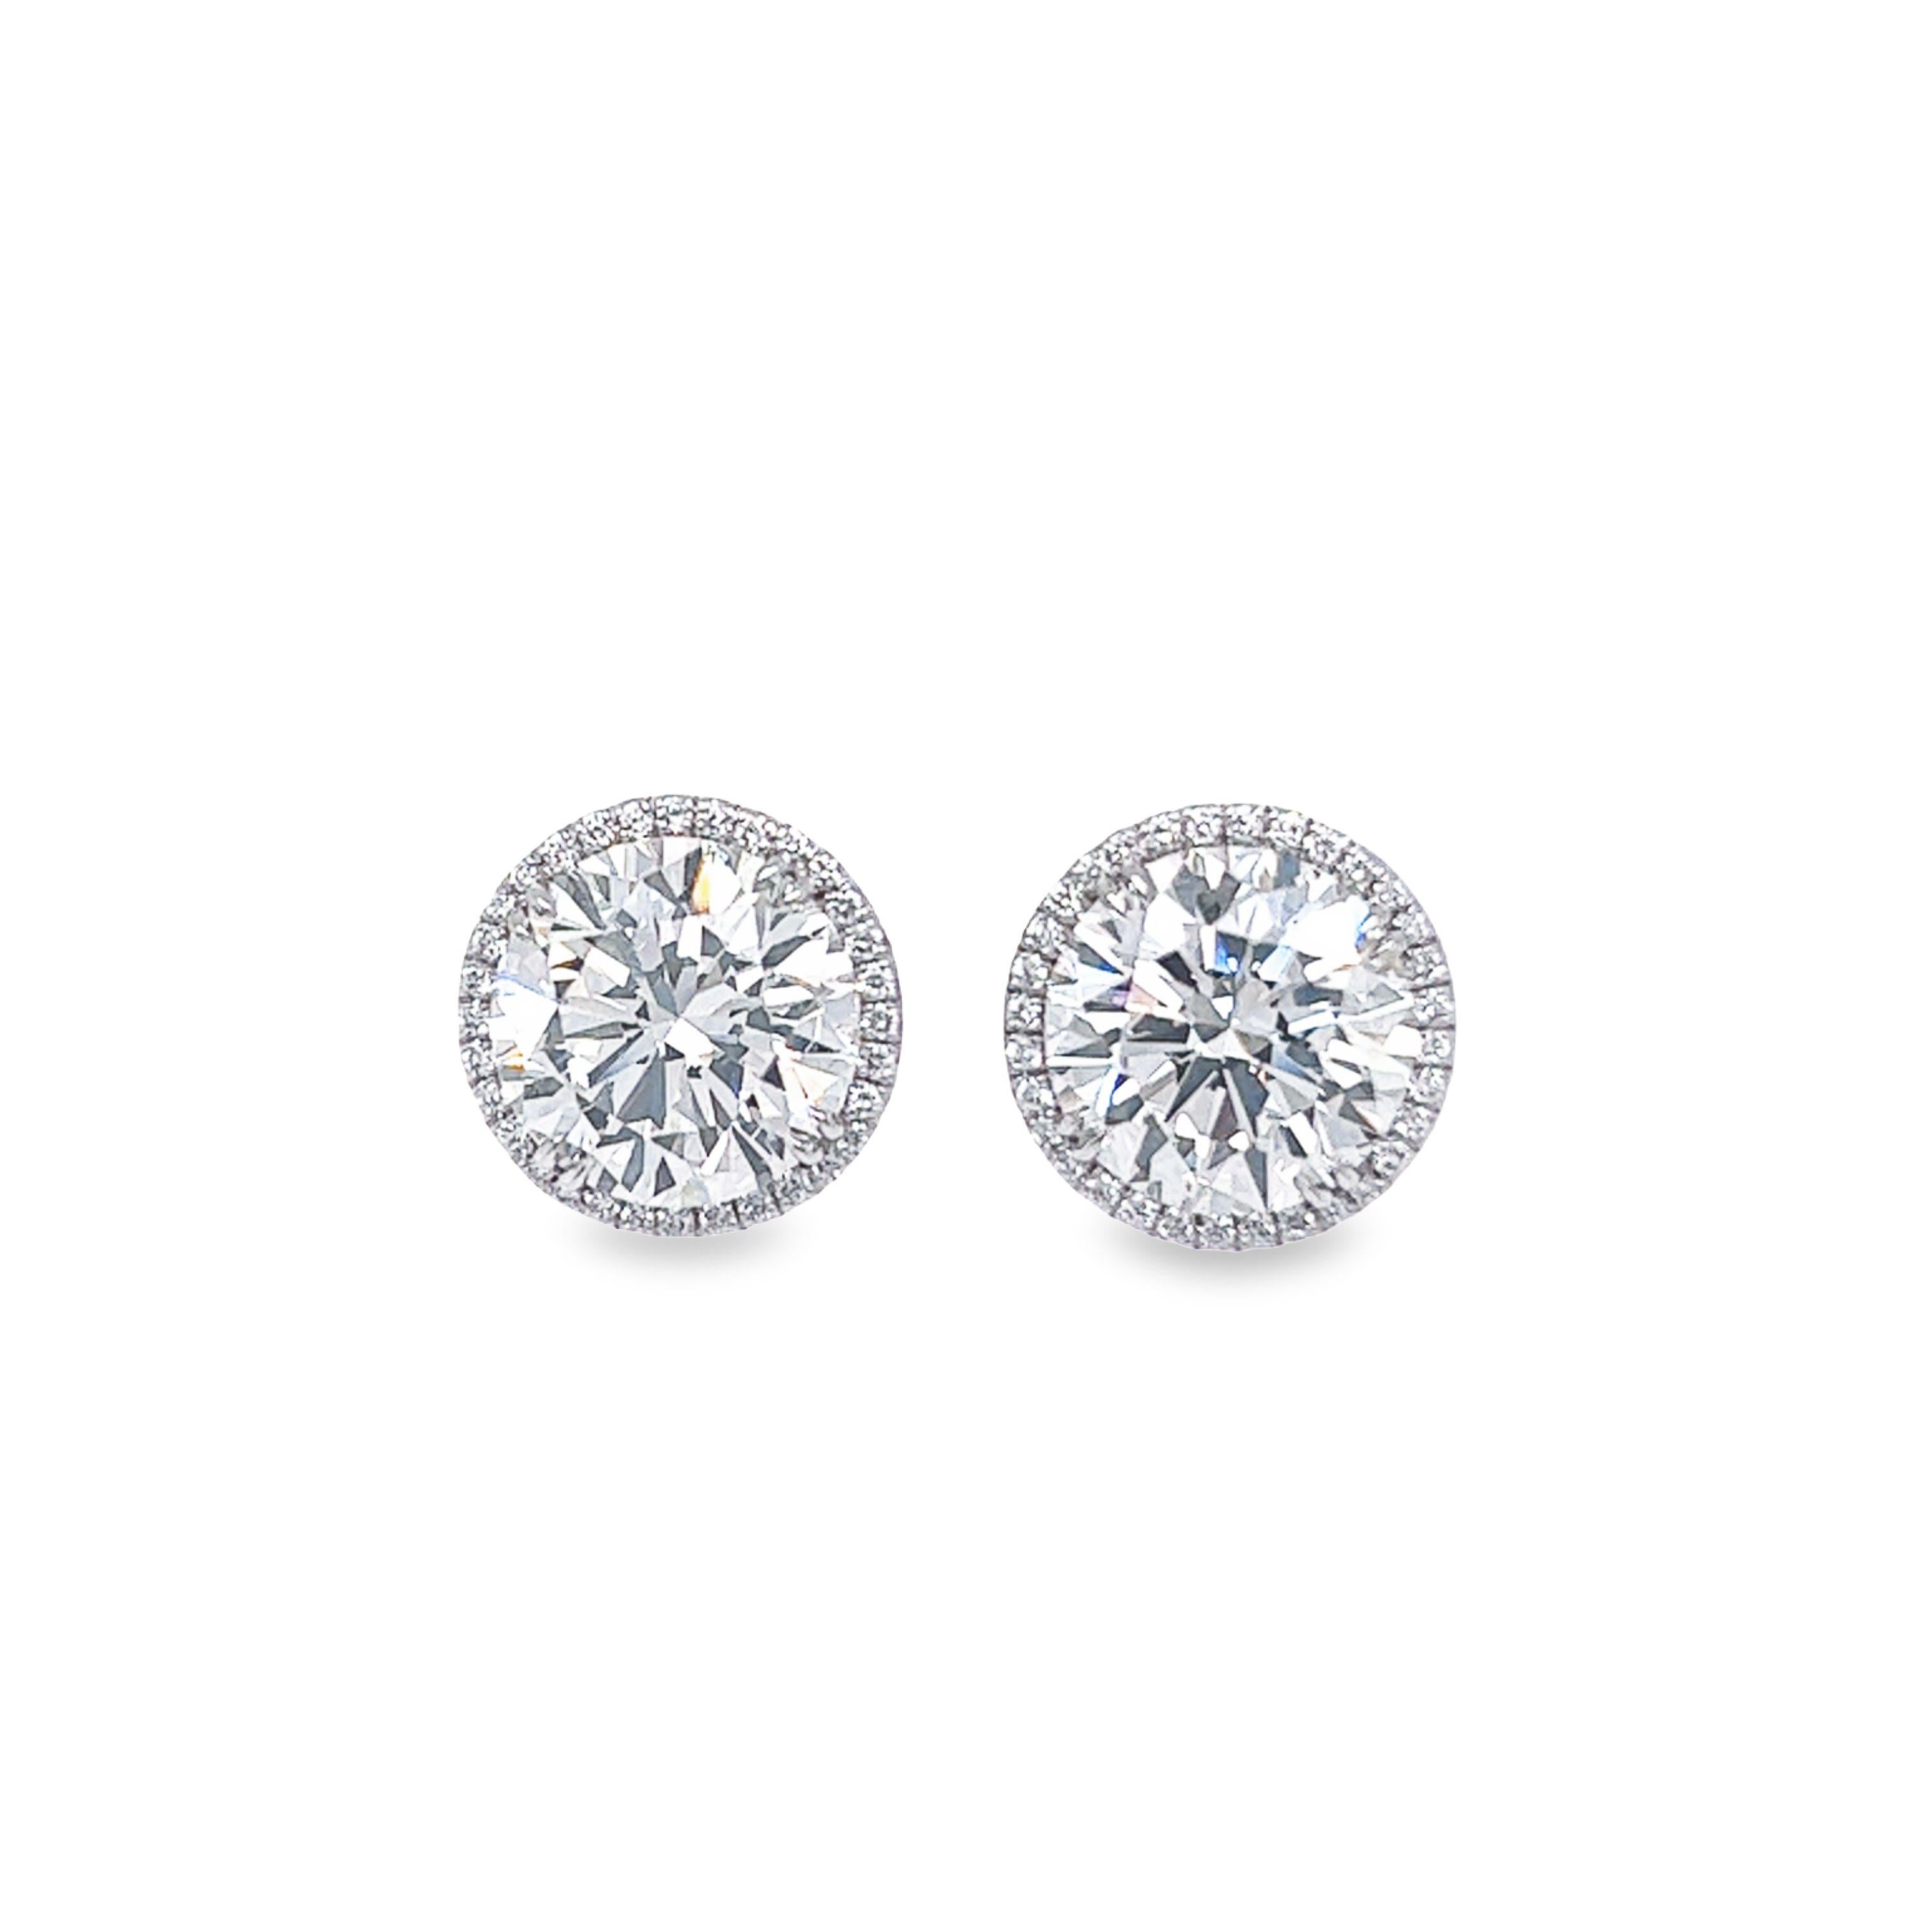 Rosenberg Diamonds & Co. 10.46 total carat weight I color IF - VS1 clarity GIA Certified is the perfect pair of diamond studs set in 18k white gold and a beautiful pave halo with a total of .34 carats. We have a large selection of GIA Certified